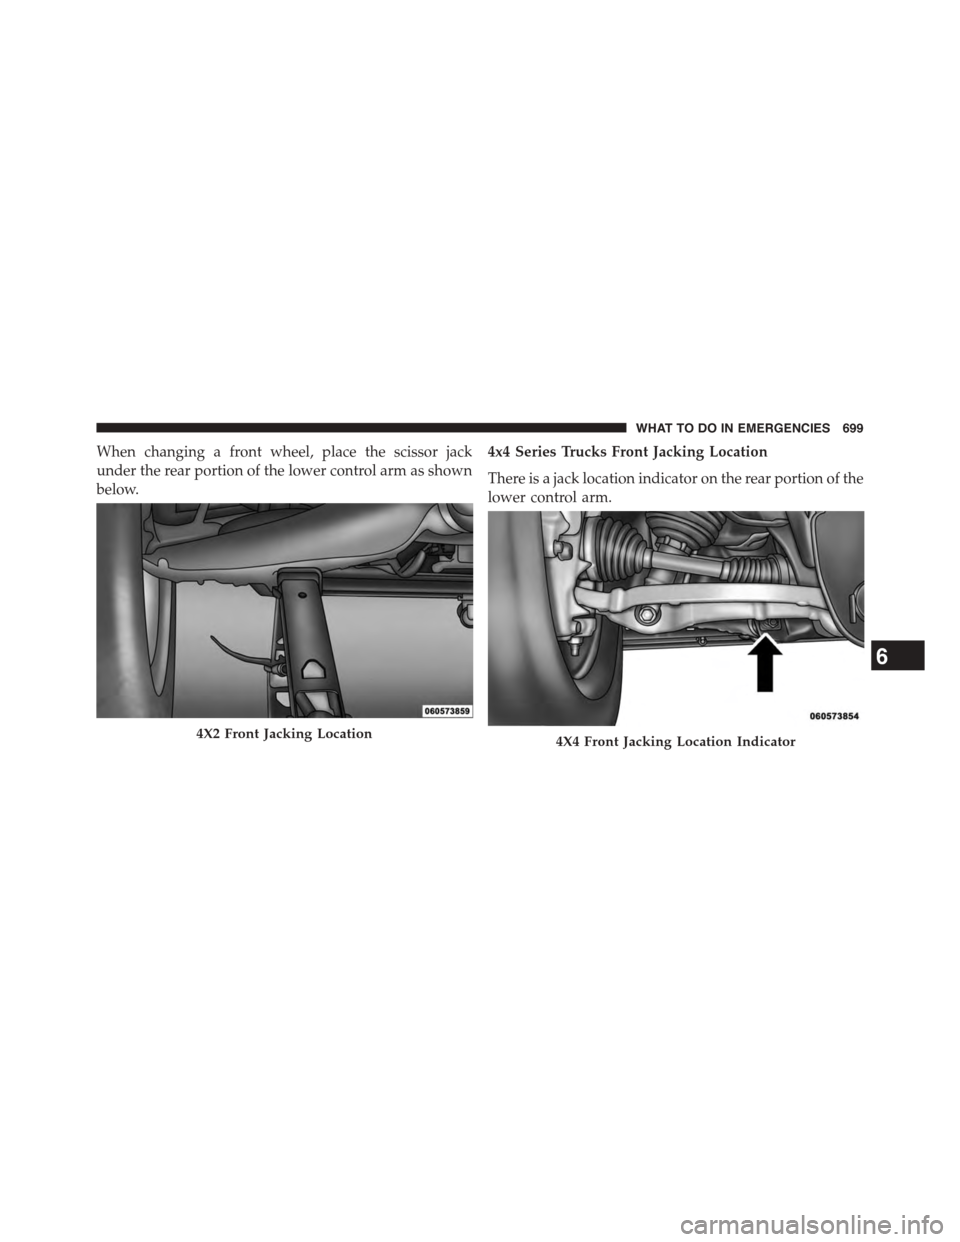 Ram 1500 2015  Owners Manual When changing a front wheel, place the scissor jack
under the rear portion of the lower control arm as shown
below.
4x4 Series Trucks Front Jacking Location
There is a jack location indicator on the r